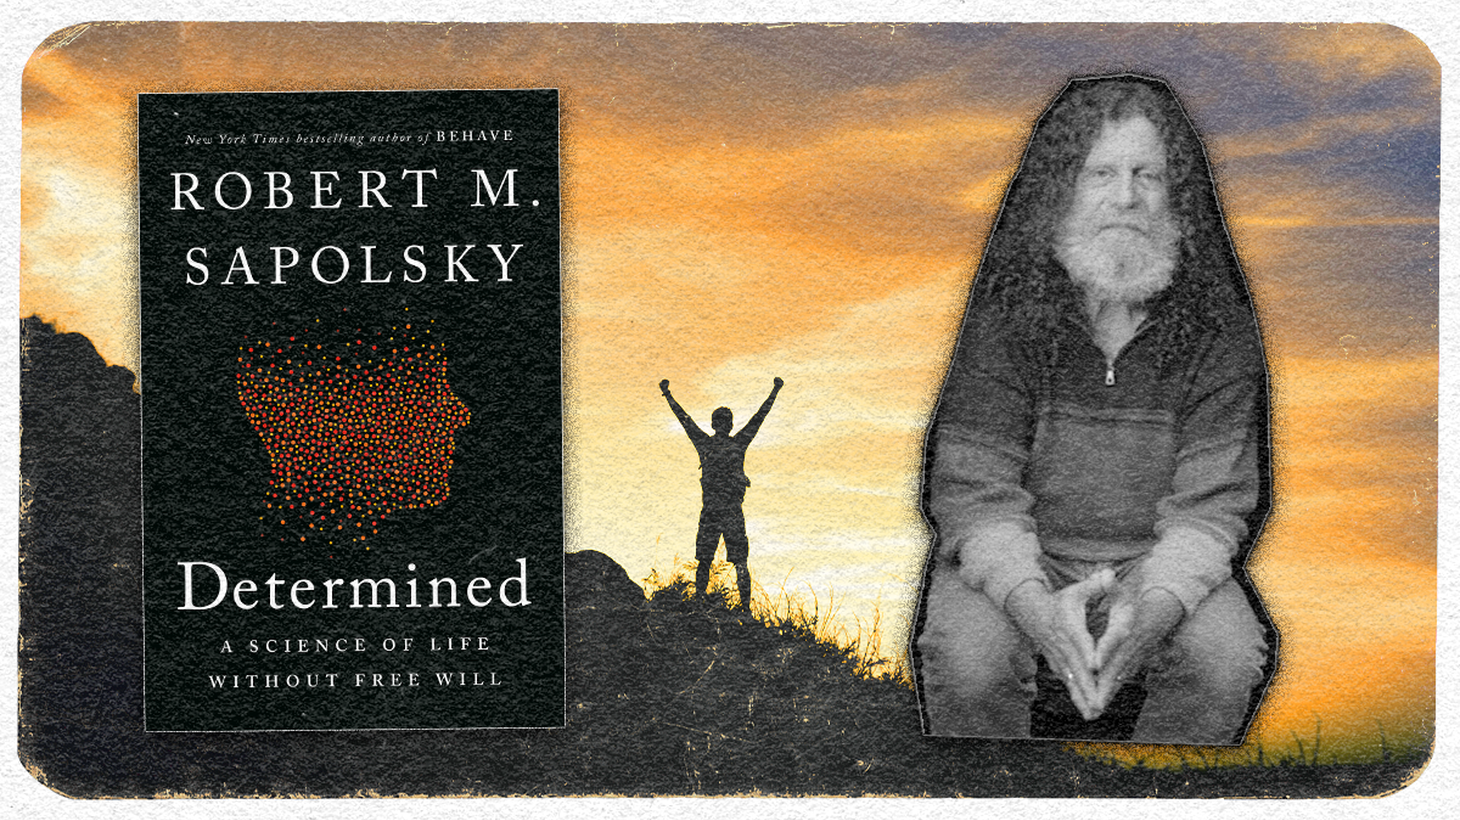 “Neuroscience cannot disprove free will. Genetics cannot disprove free will. Endocrinology can't do it. Evolutionary theory, child development, etcetera, etcetera, but put all the pieces together and you can” says Robert Sapolsky.